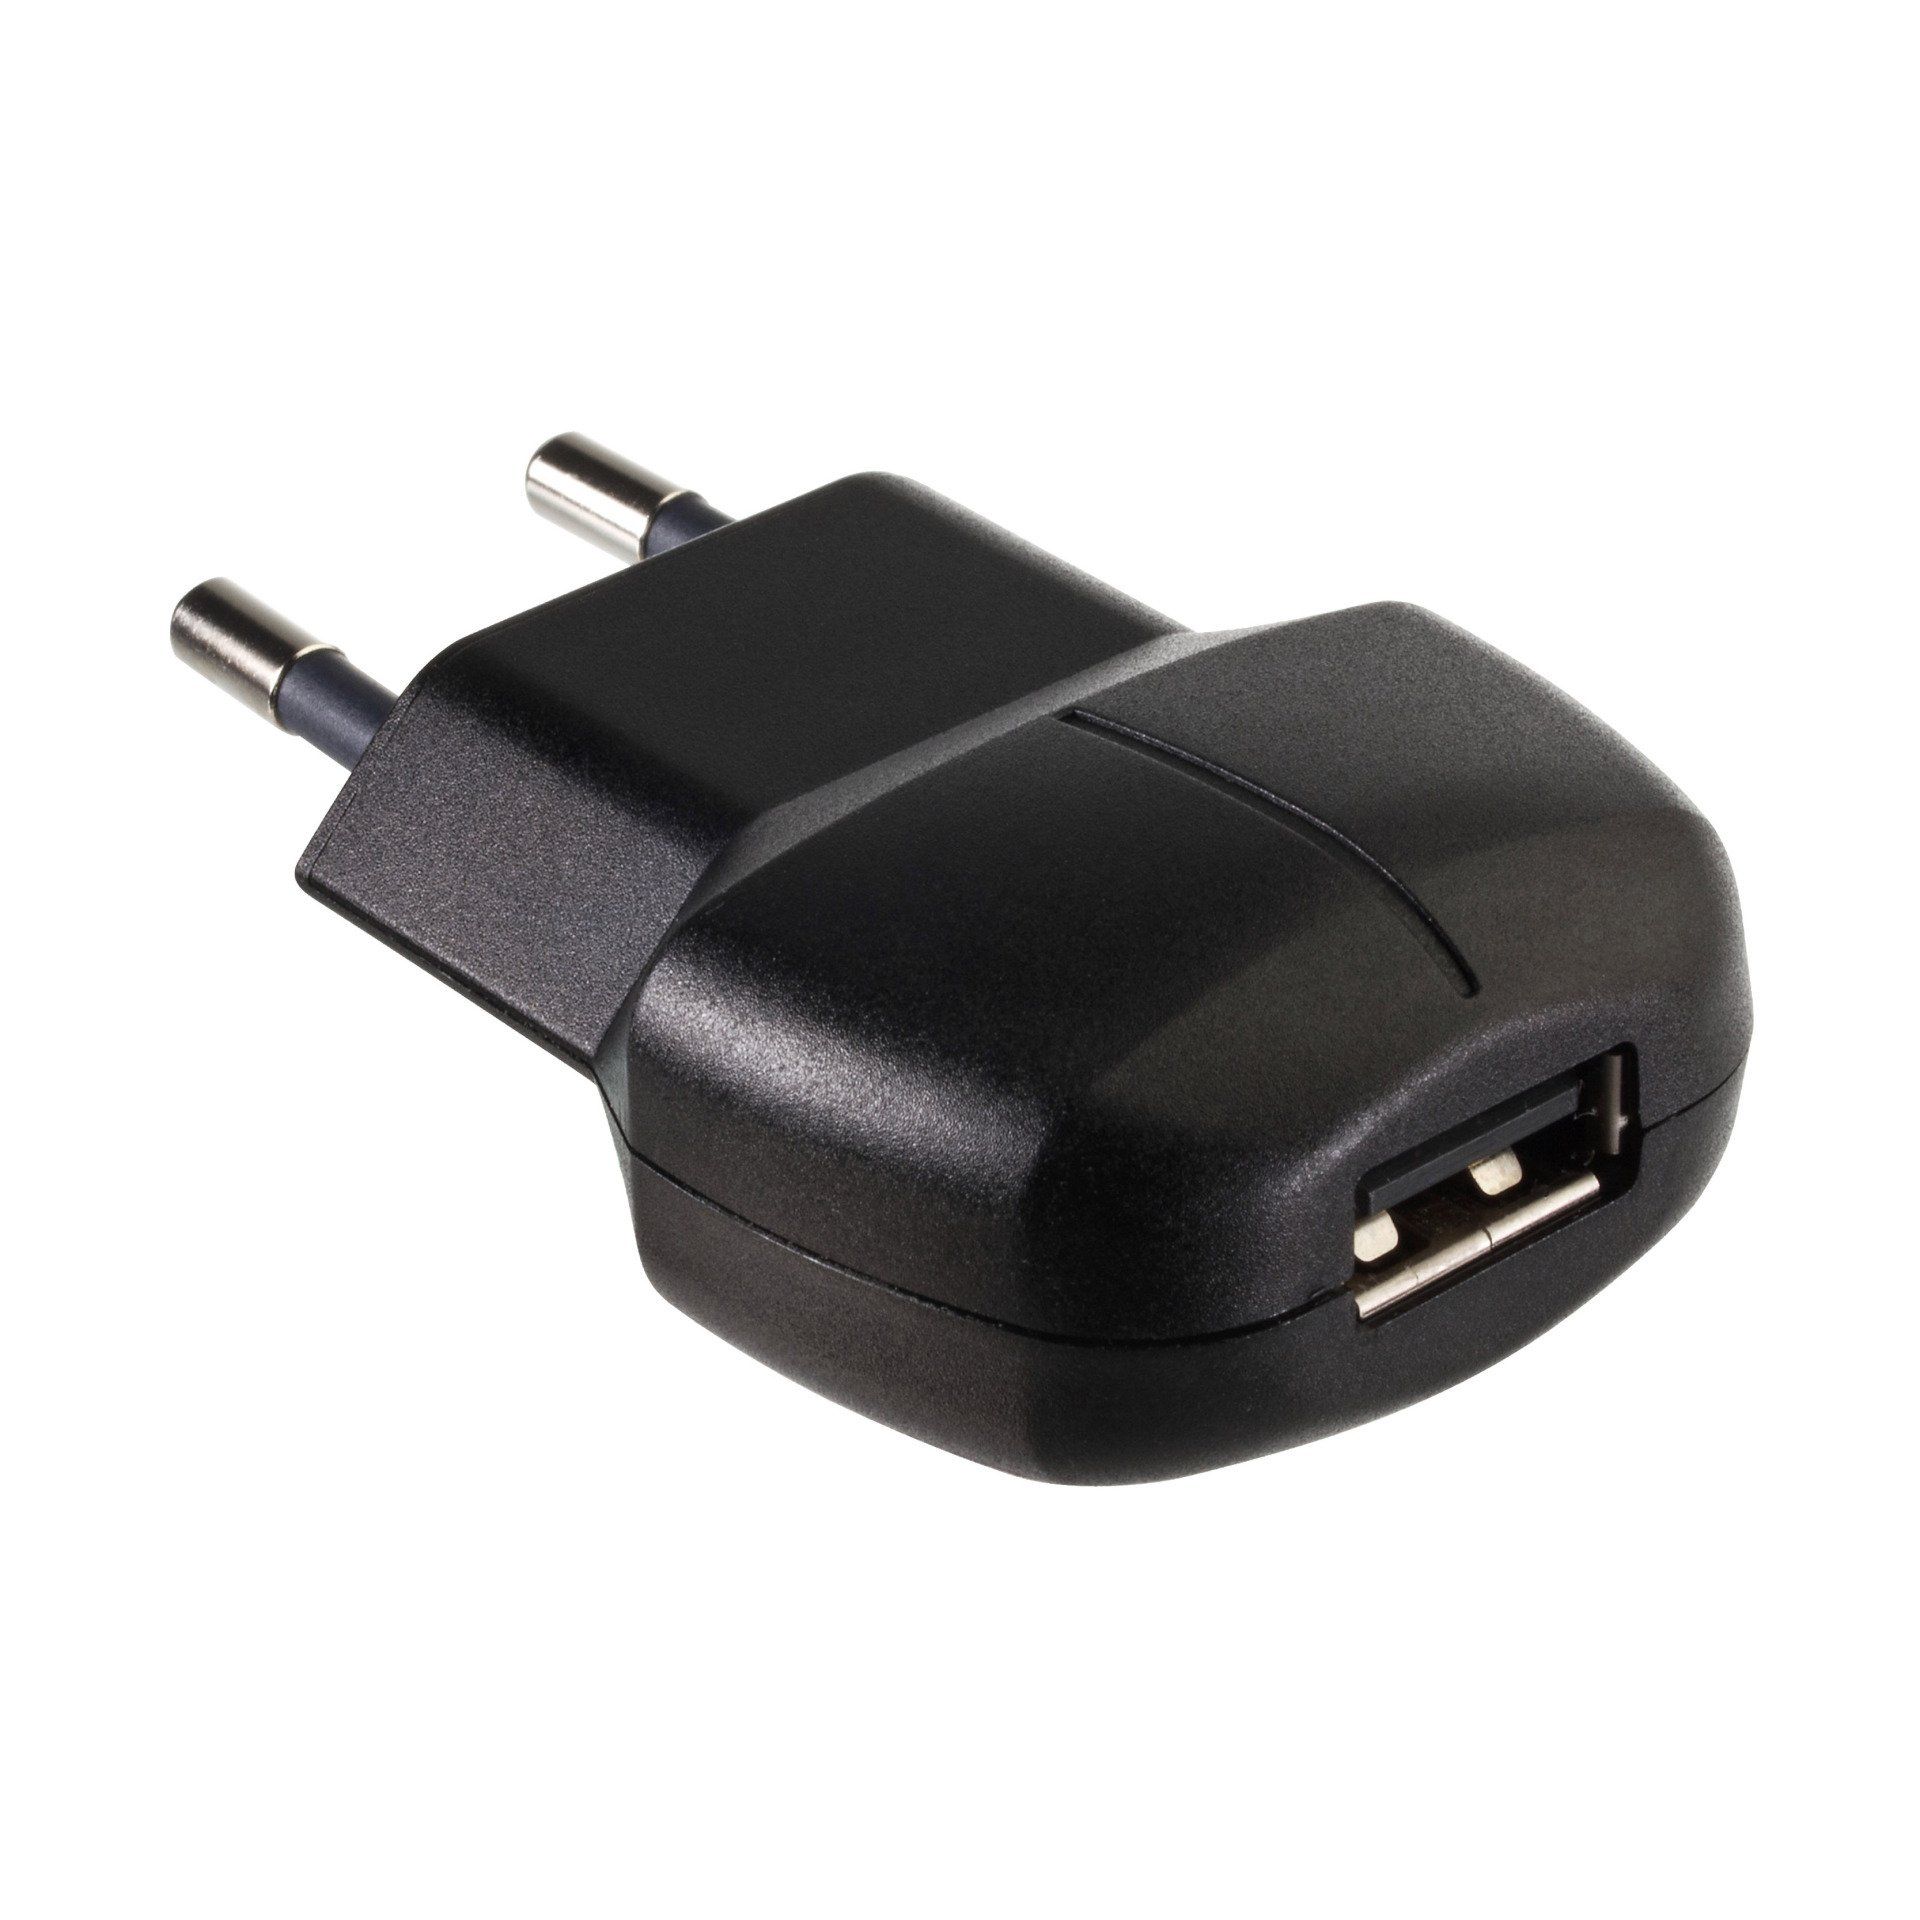 A close up of a black usb charger on a white background